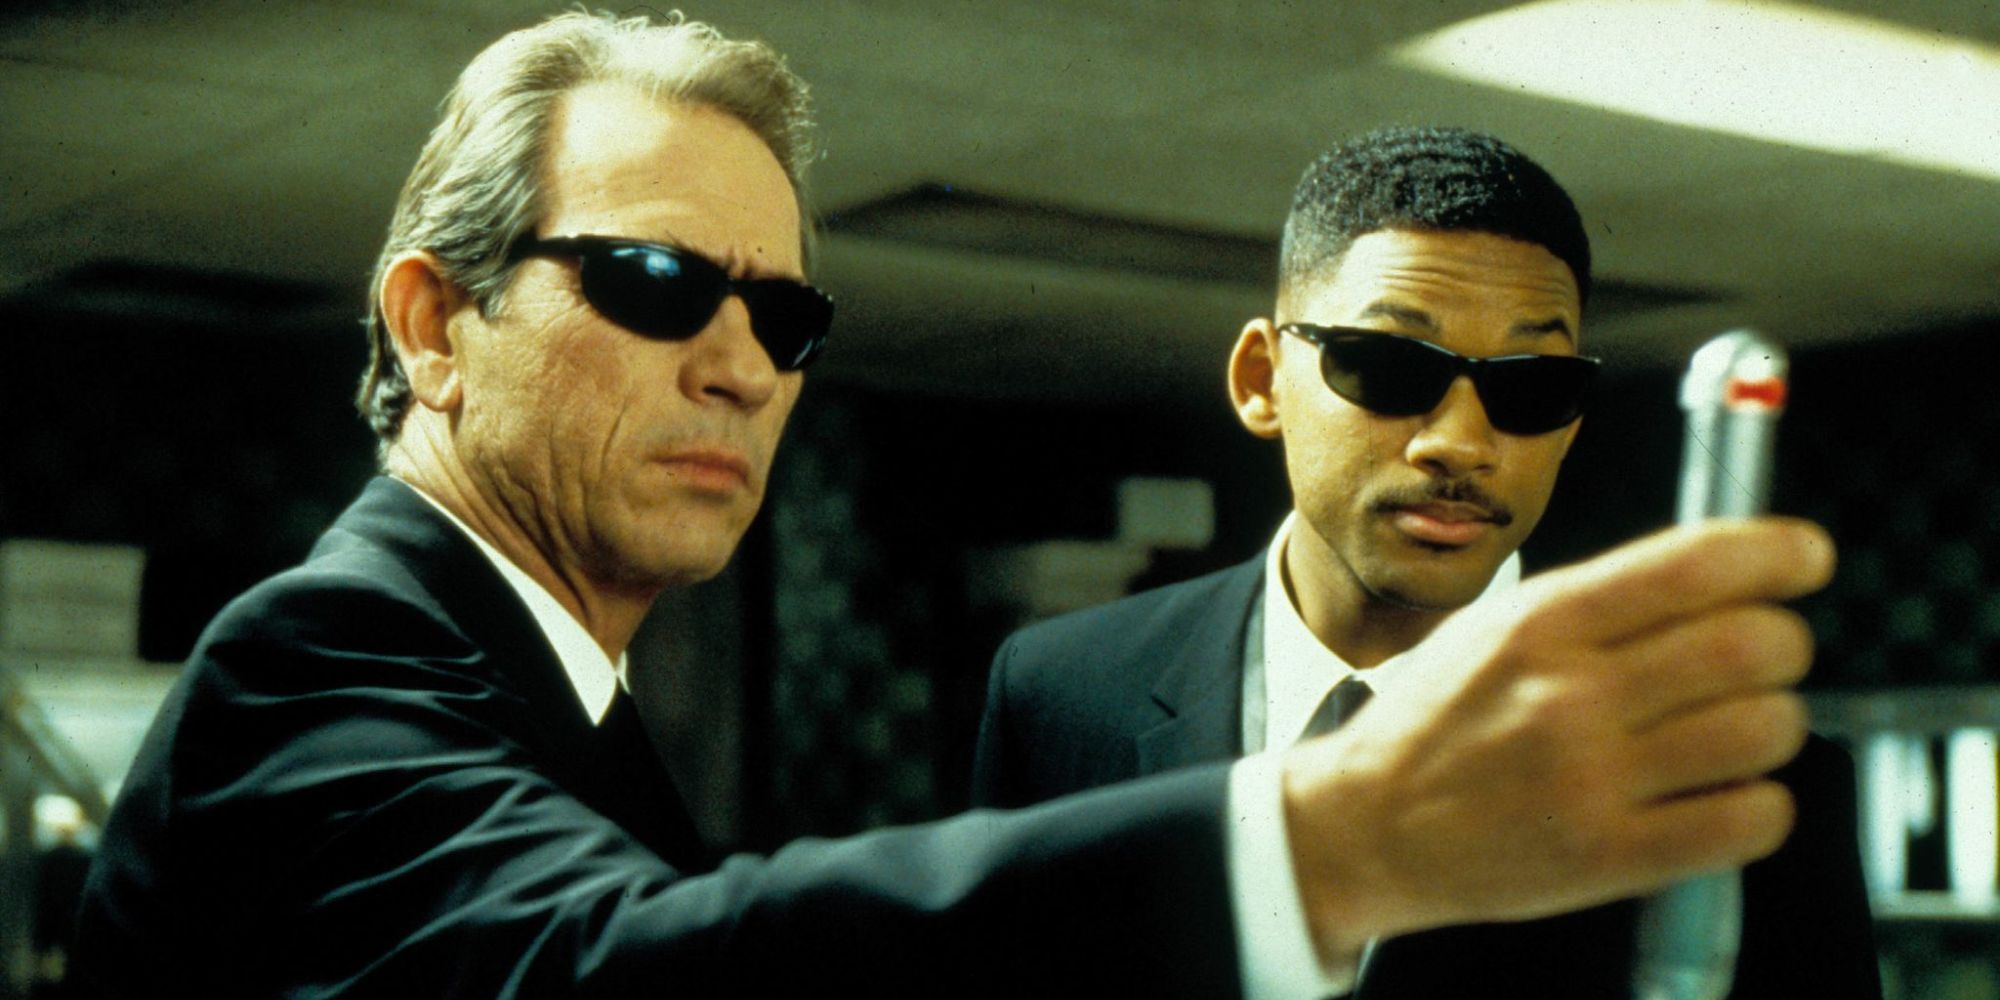 Bad Boys vs Men In Black Which Will Smith Franchise Is Better